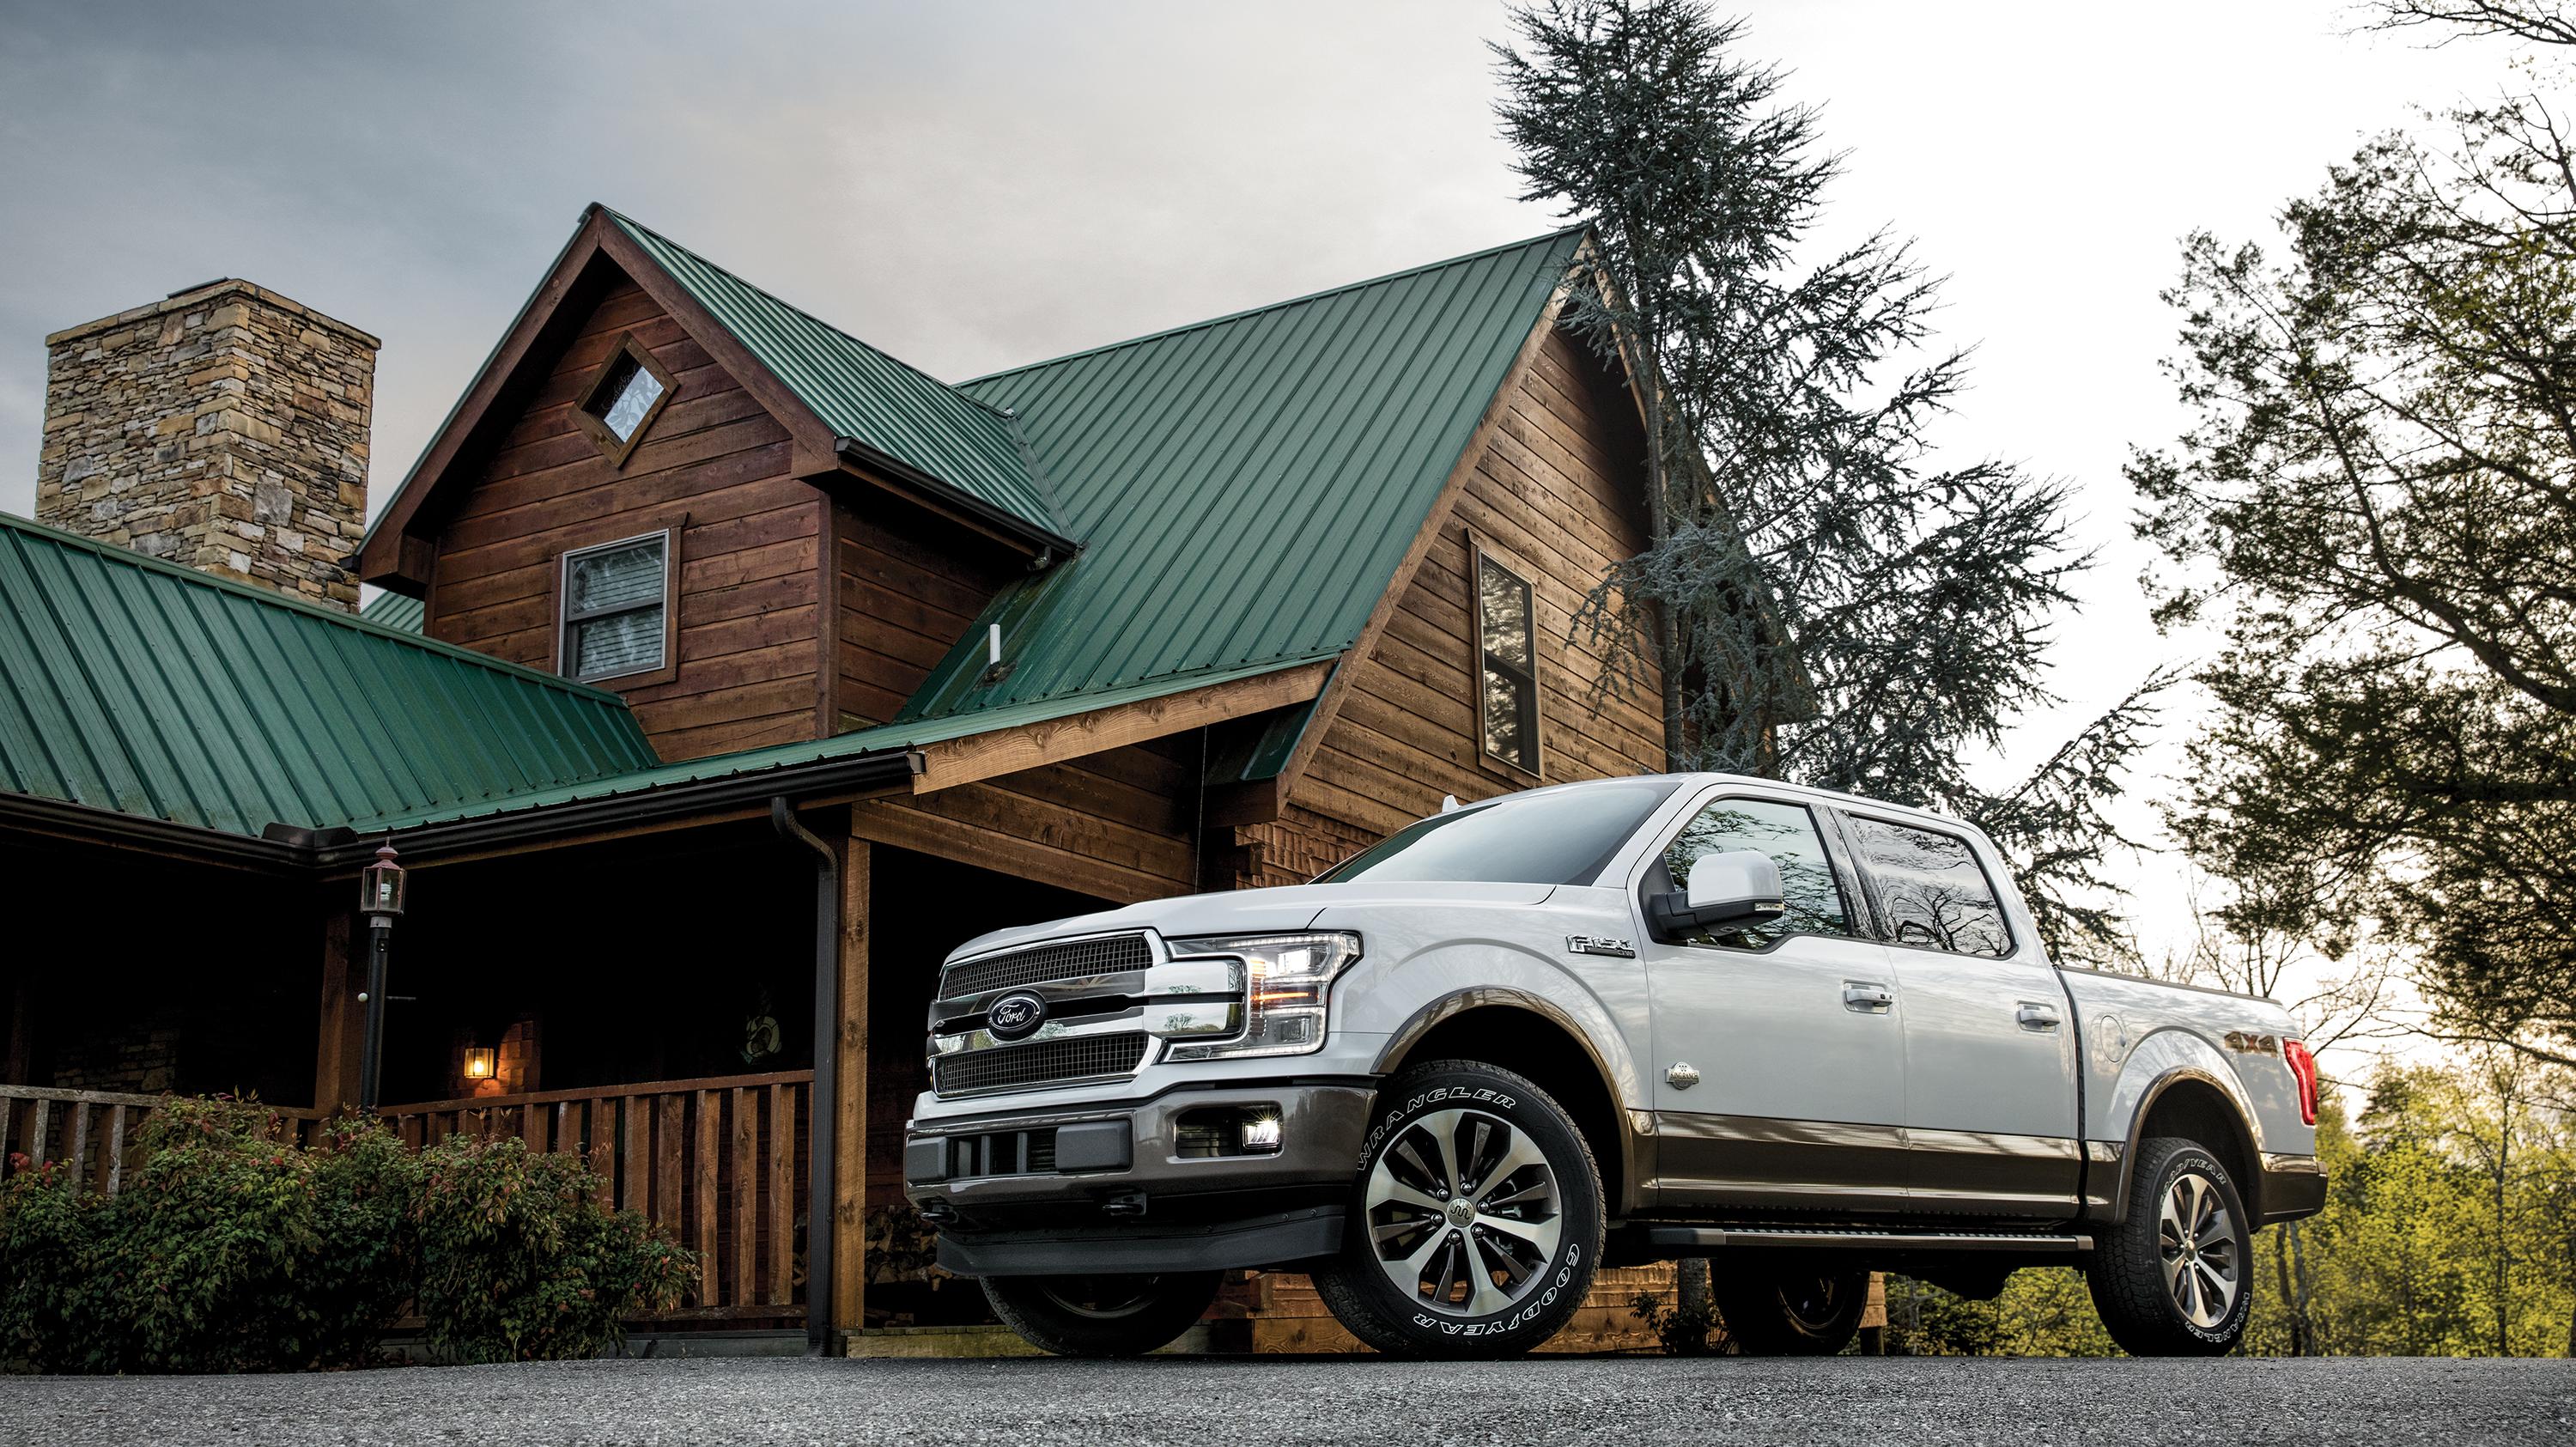 2018 Ford F-150| Lifestyle | House